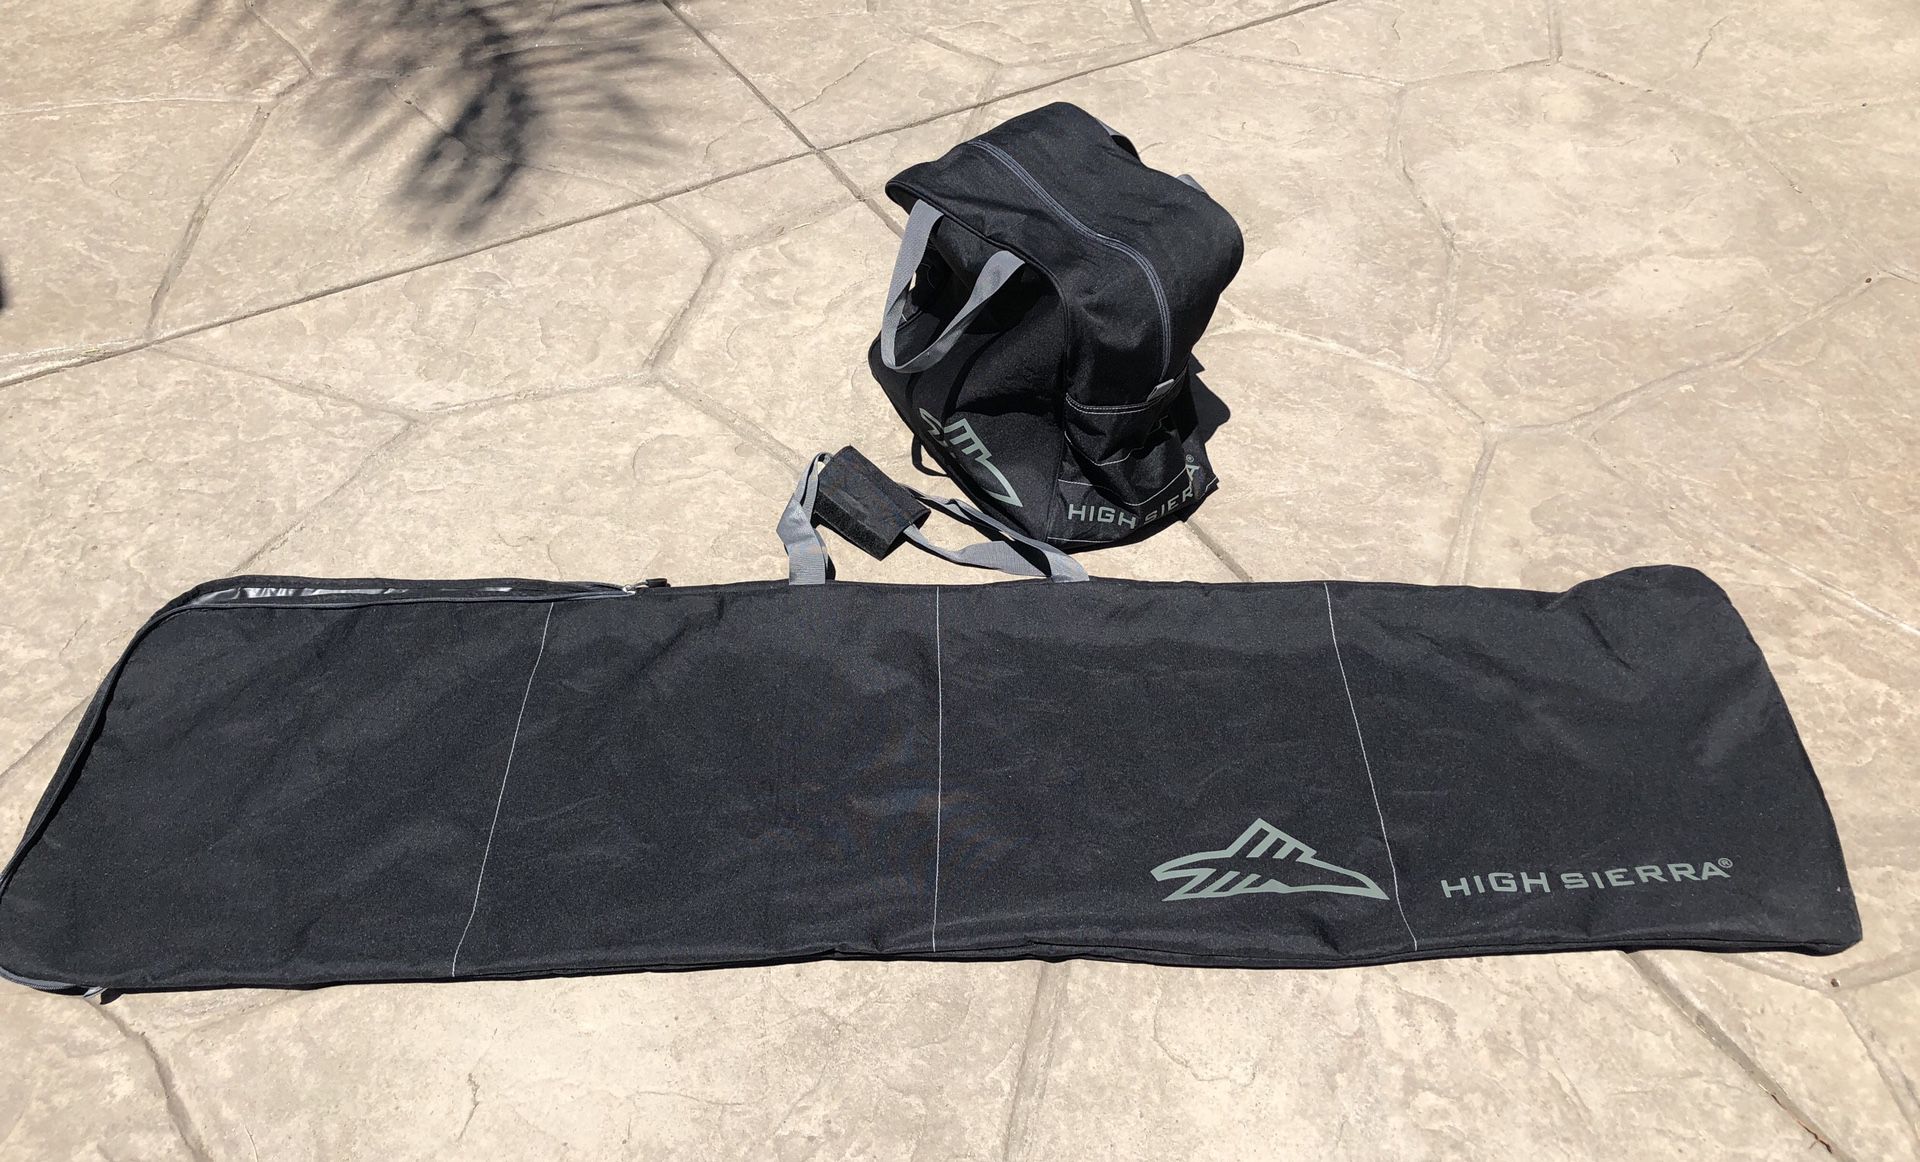 High Sierra Snowboard and Boot Bags